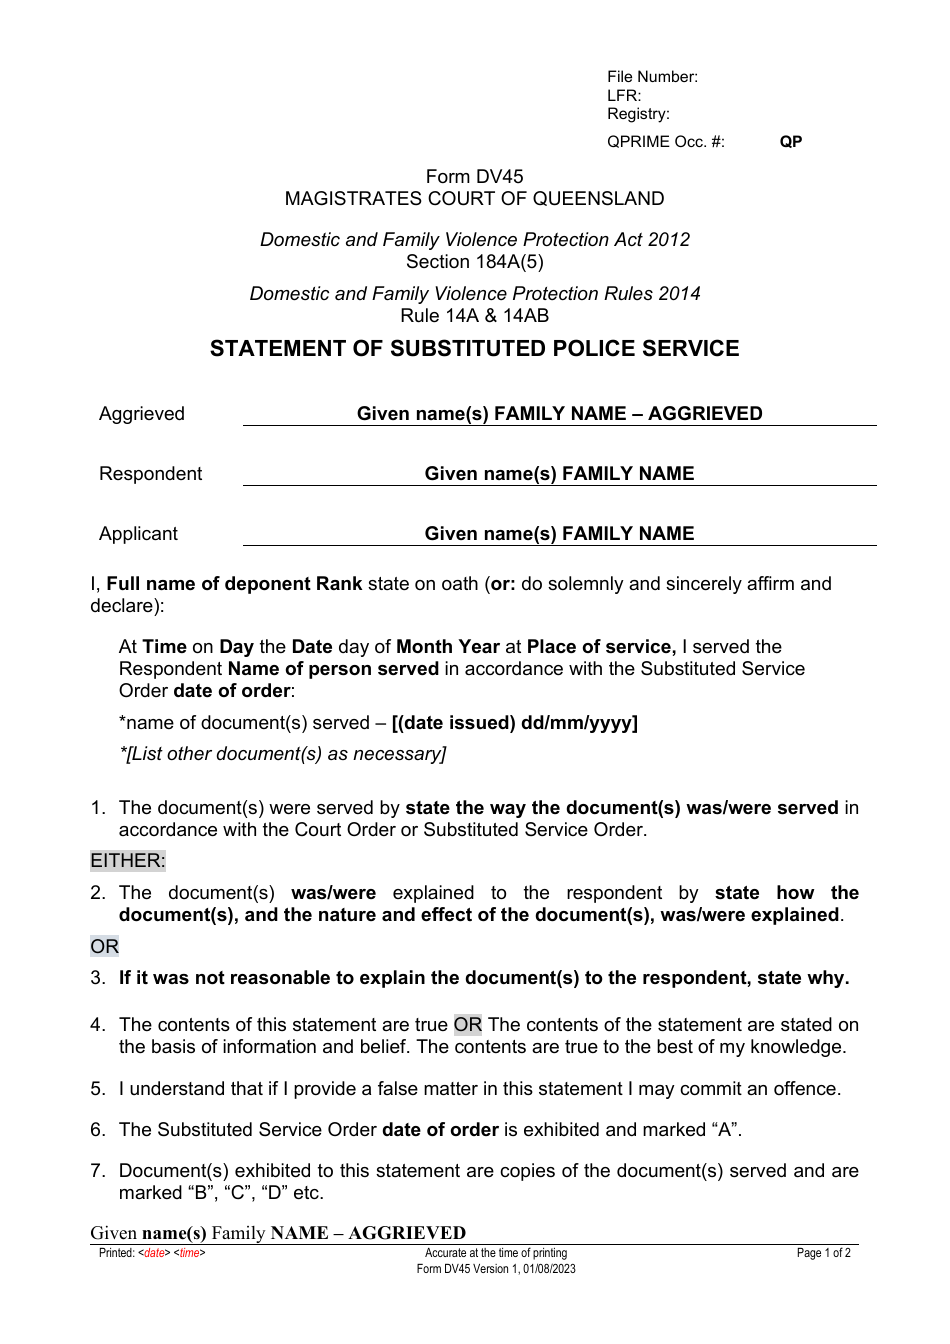 Form DV45 Statement of Substituted Police Service - Queensland, Australia, Page 1